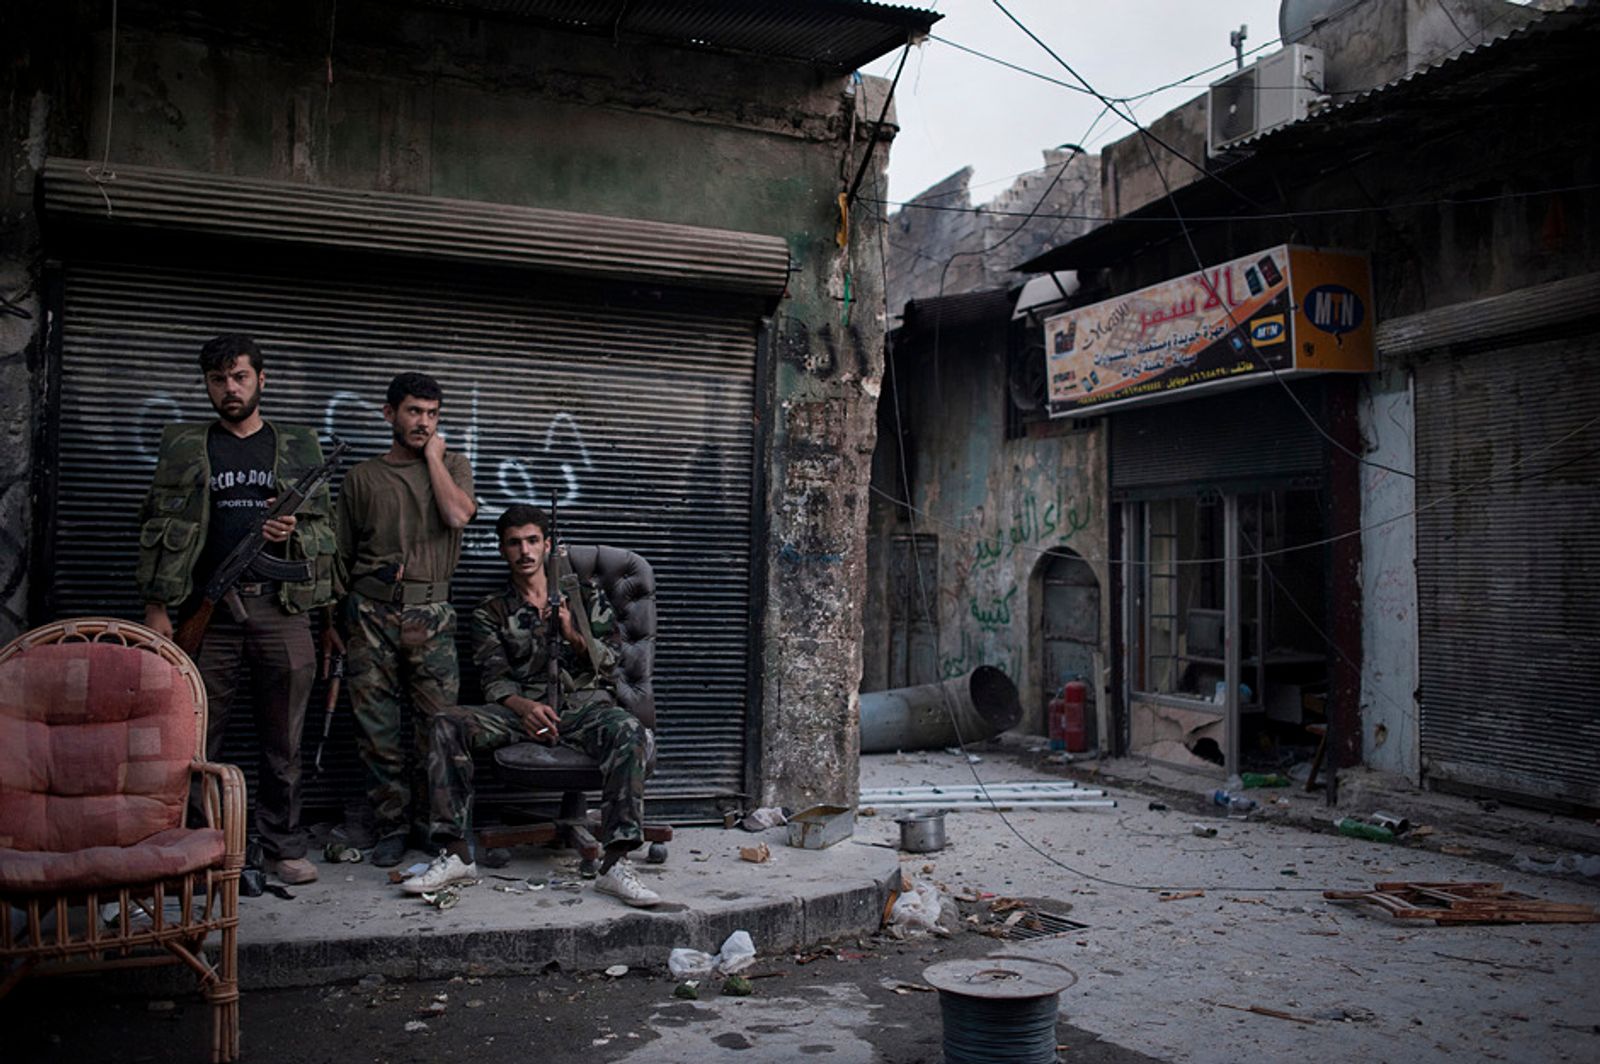 © Giulio Piscitelli - Image from the Syria: An orphan revolution photography project